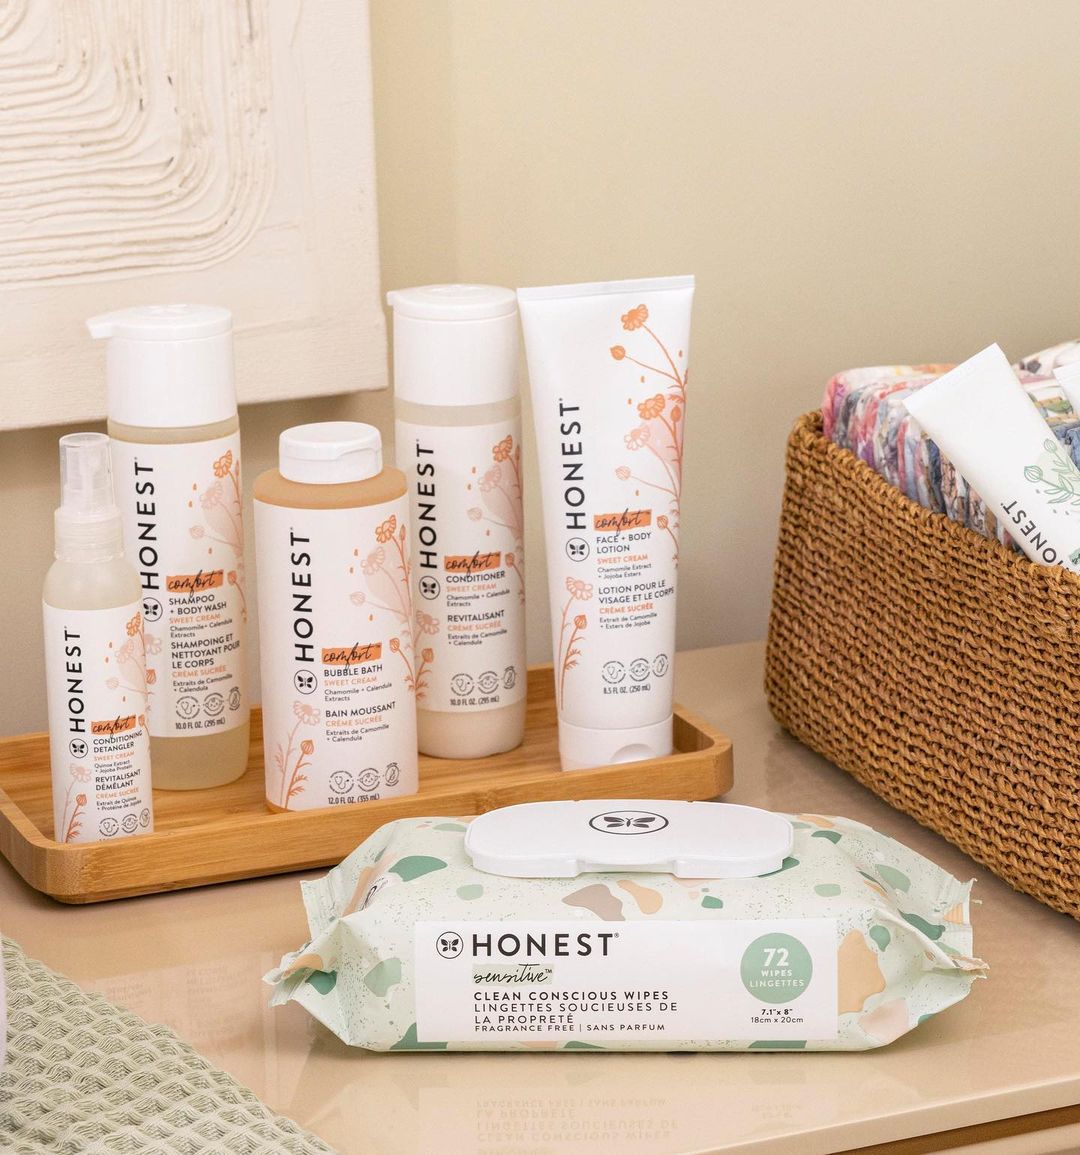 The Honest Company cofounded by Jessica Alba